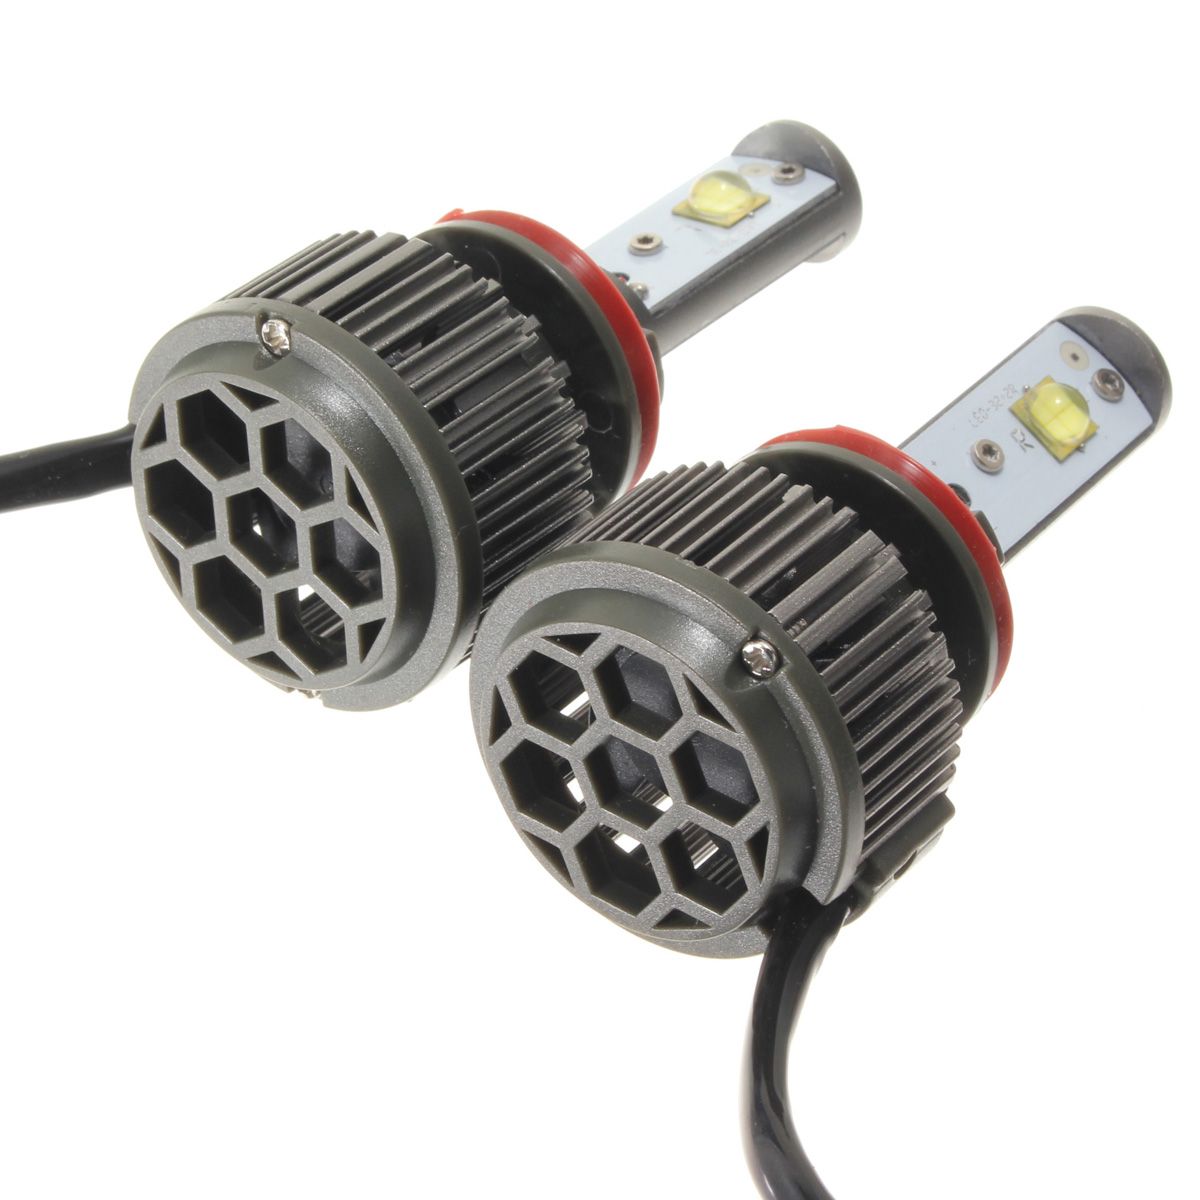 Pair-60W-Turbo-LED-Headlight-Lamp-H11-H9-H8-7200LM-6000K-with-Wire-1014681